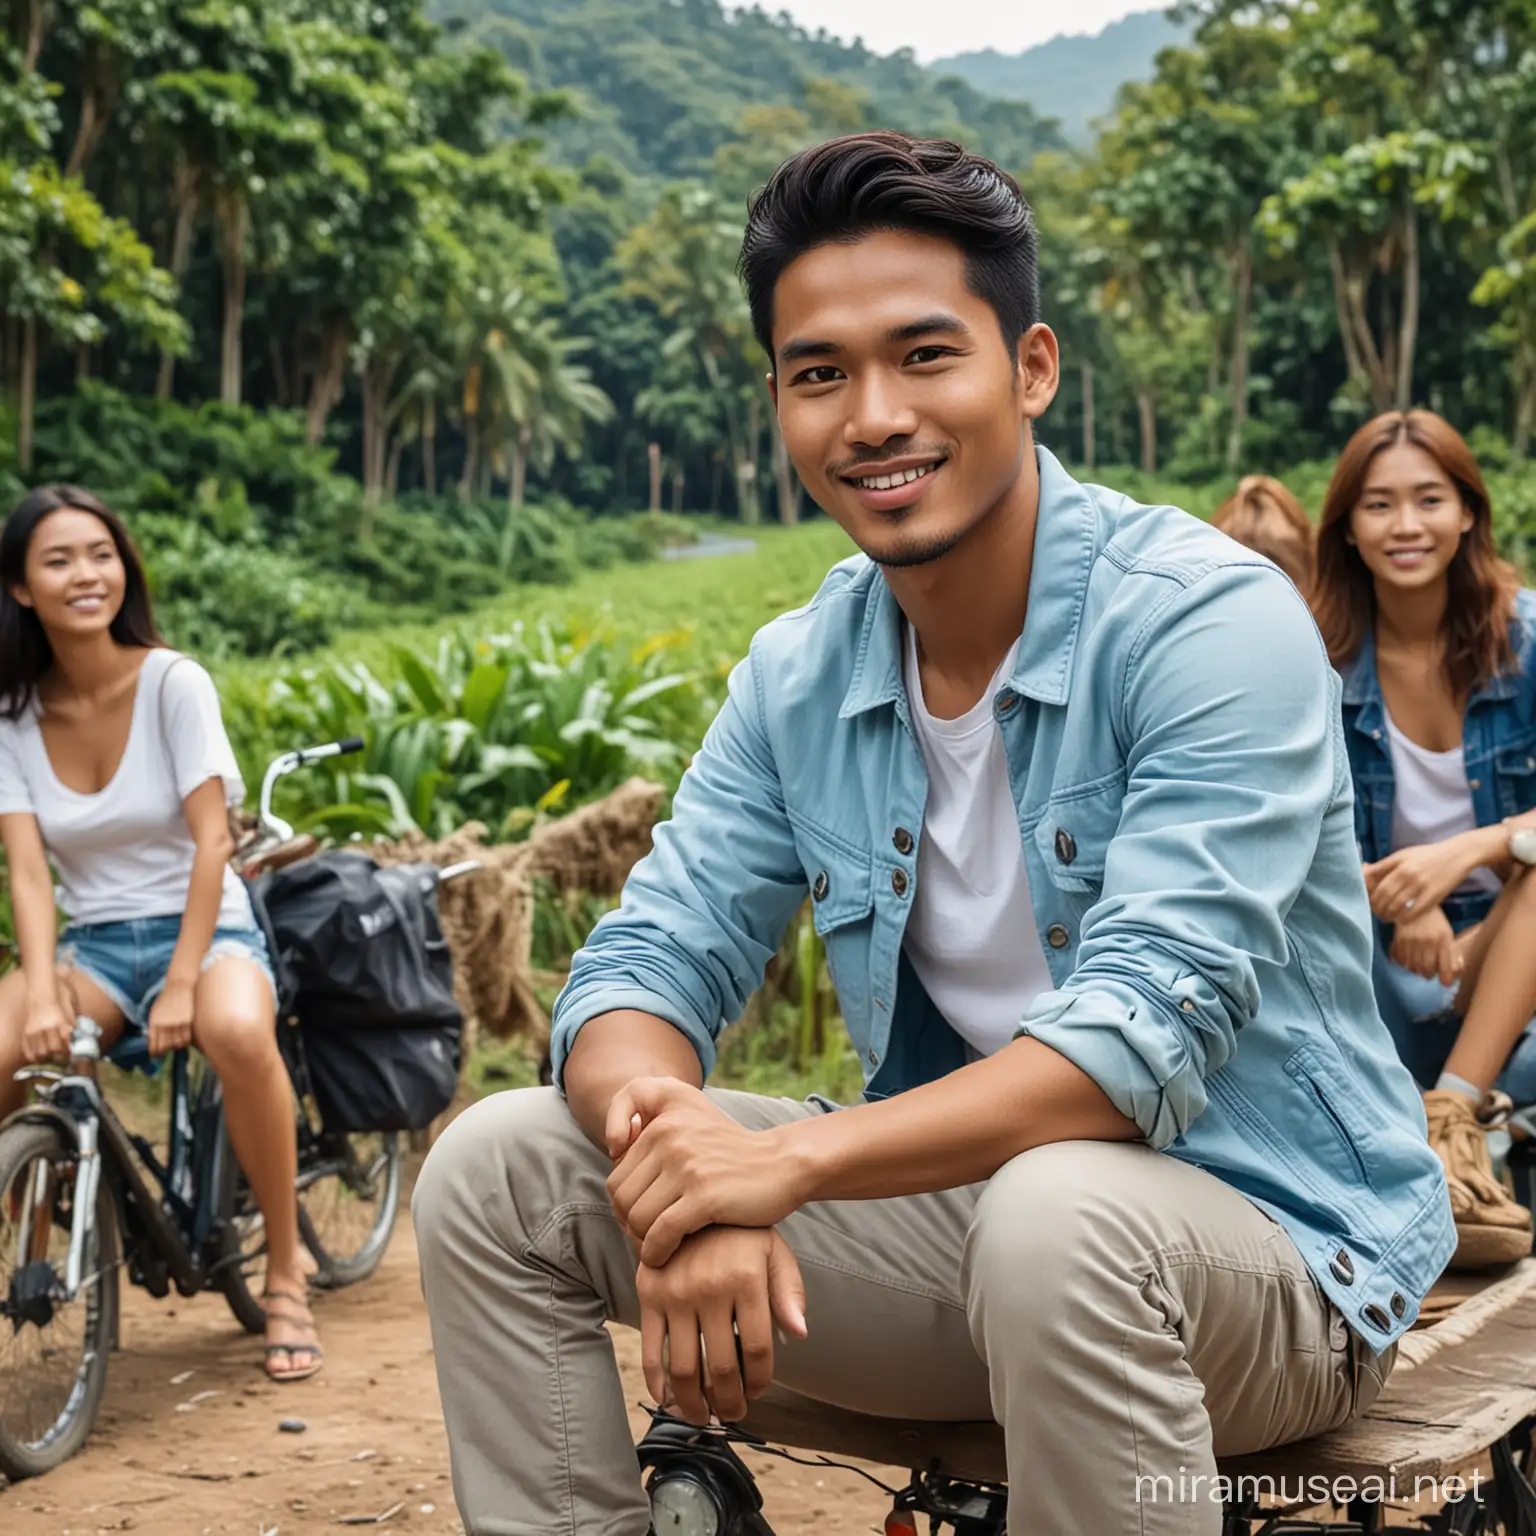 Young Indonesian Man Seeking Sustainable Travel Experiences with Beautiful Companions